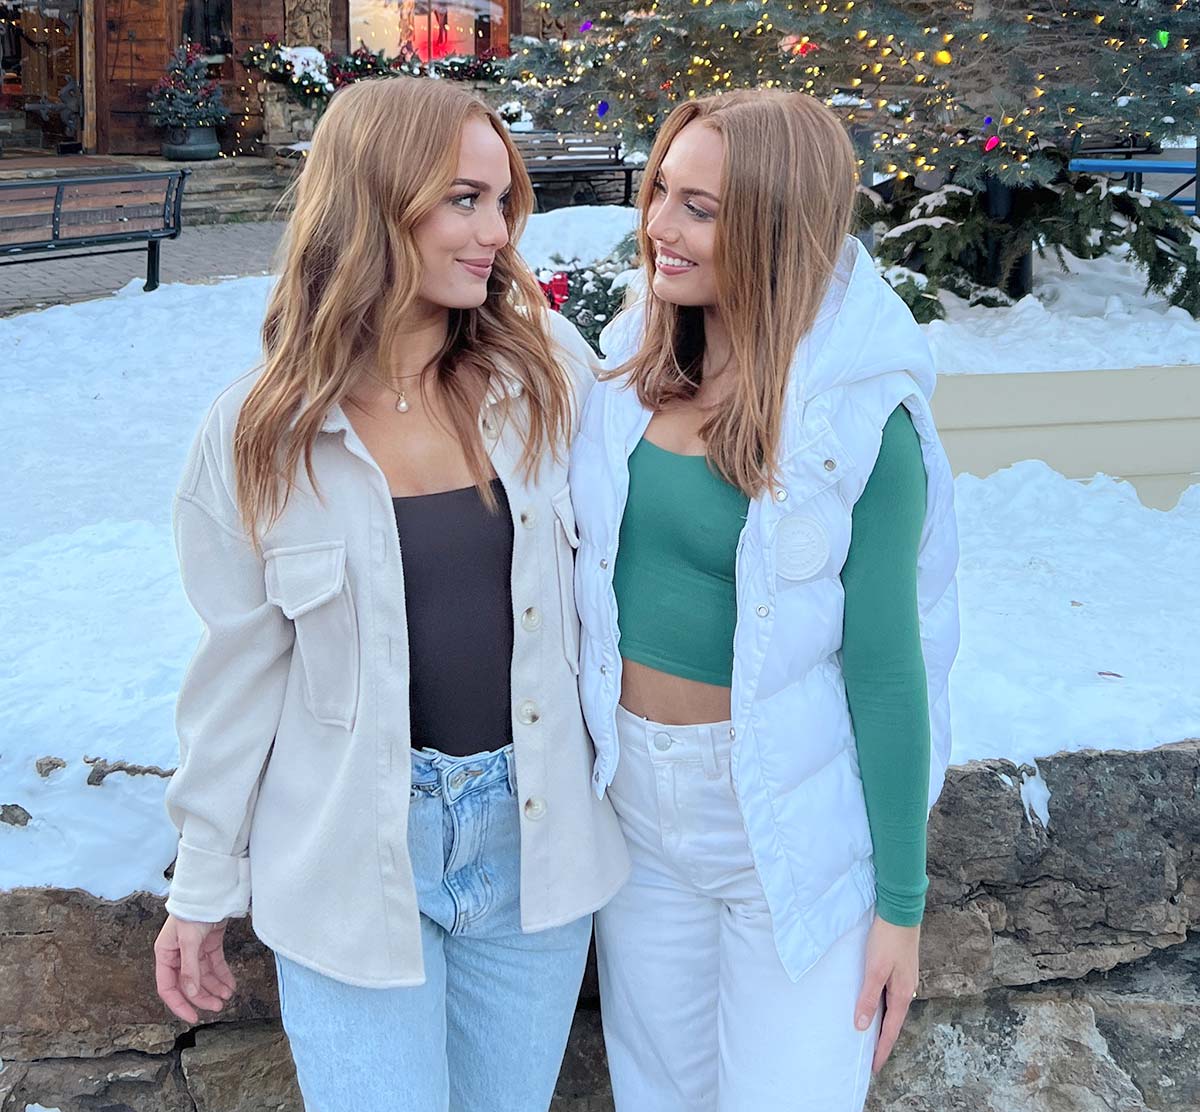 Portrait photograph perspective of Abigail Rickli and her twin sister, Avery Rickli outside in a snowy cold Christmas village location looking at each other in the eyes as they both smile as one of the sisters is wearing a black long-sleeve shirt with an open tan colored cardigan button-up shirt, blue denim jeans, and a pearl colored necklace and the other sister is wearing a white puffy jacket with a green long sleeve shirt plus white jeans